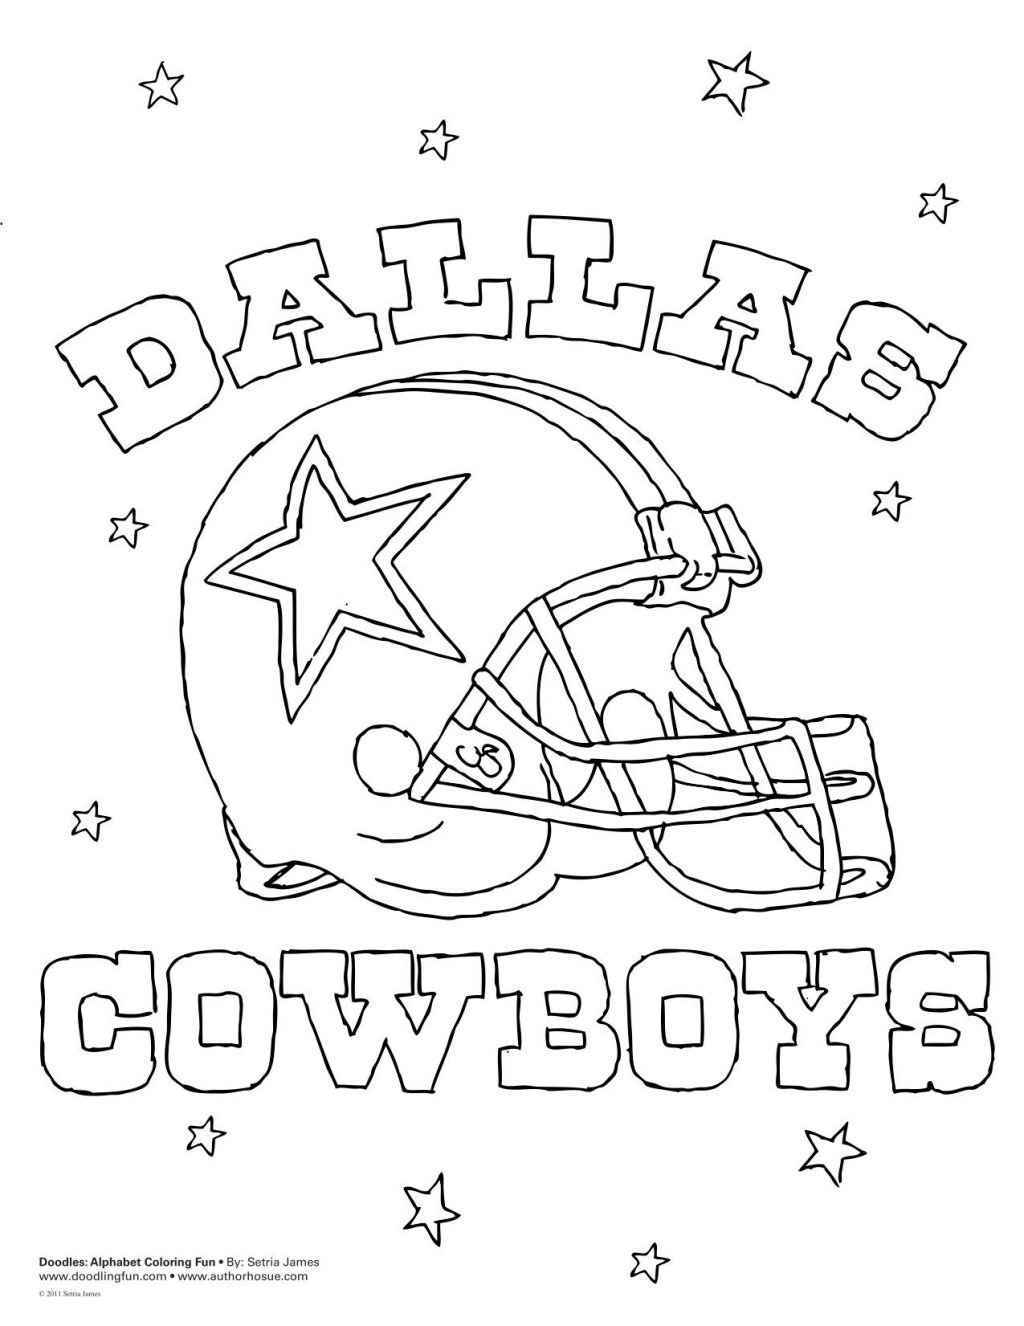 Cowboys Coloring Pages
 Coloring Remarkable Dallas Cowboys Coloring Pages